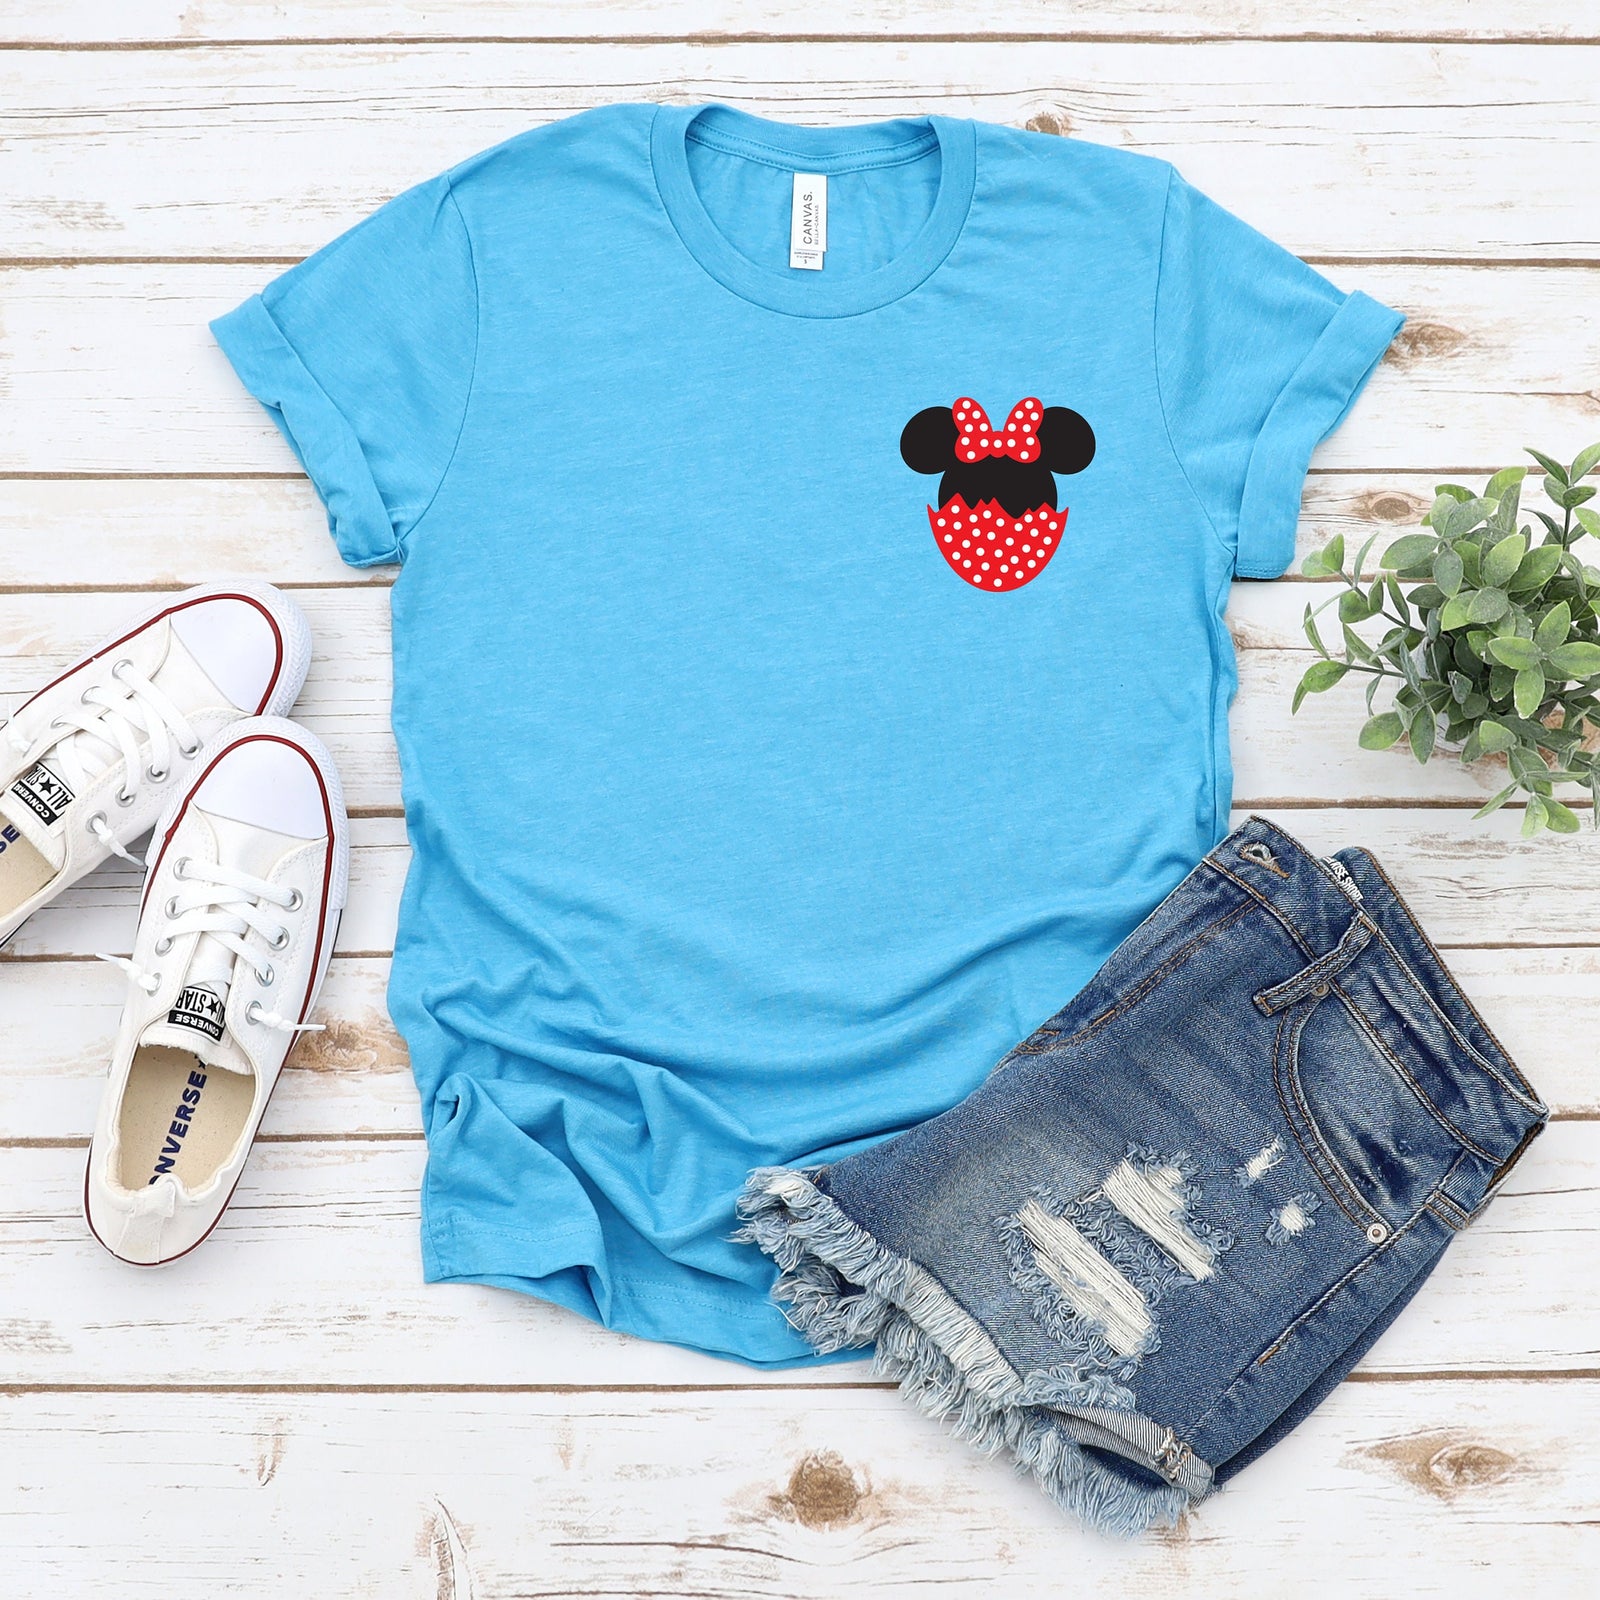 Minnie Mouse Happy Easter Adult T Shirt- Disney Trip Matching Shirts -Pocket Size Minnie Ears Hatching Egg - Small Logo